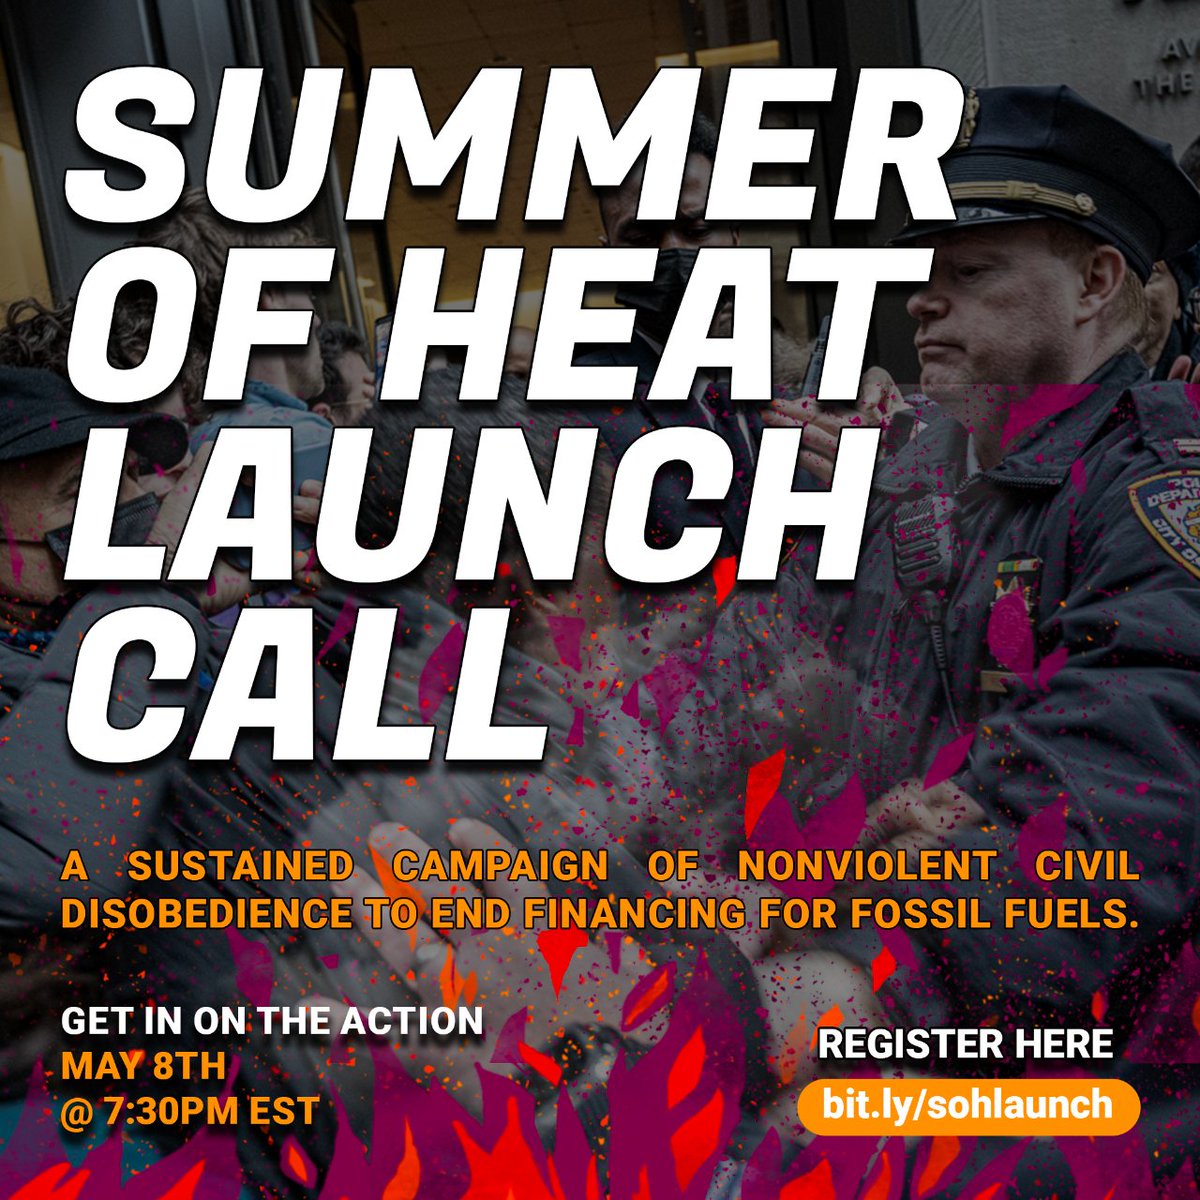 Calling all Hot People who hate Wall Street's financing of climate chaos! 🔥

Join us TOMORROW May 8th @ 7:30pm EST for the #SummerofHeat Campaign Launch Call! ✊🏽

🔗Click the link to join us bit.ly/sohlaunch

#ClimateJustice #EndFossilFuels